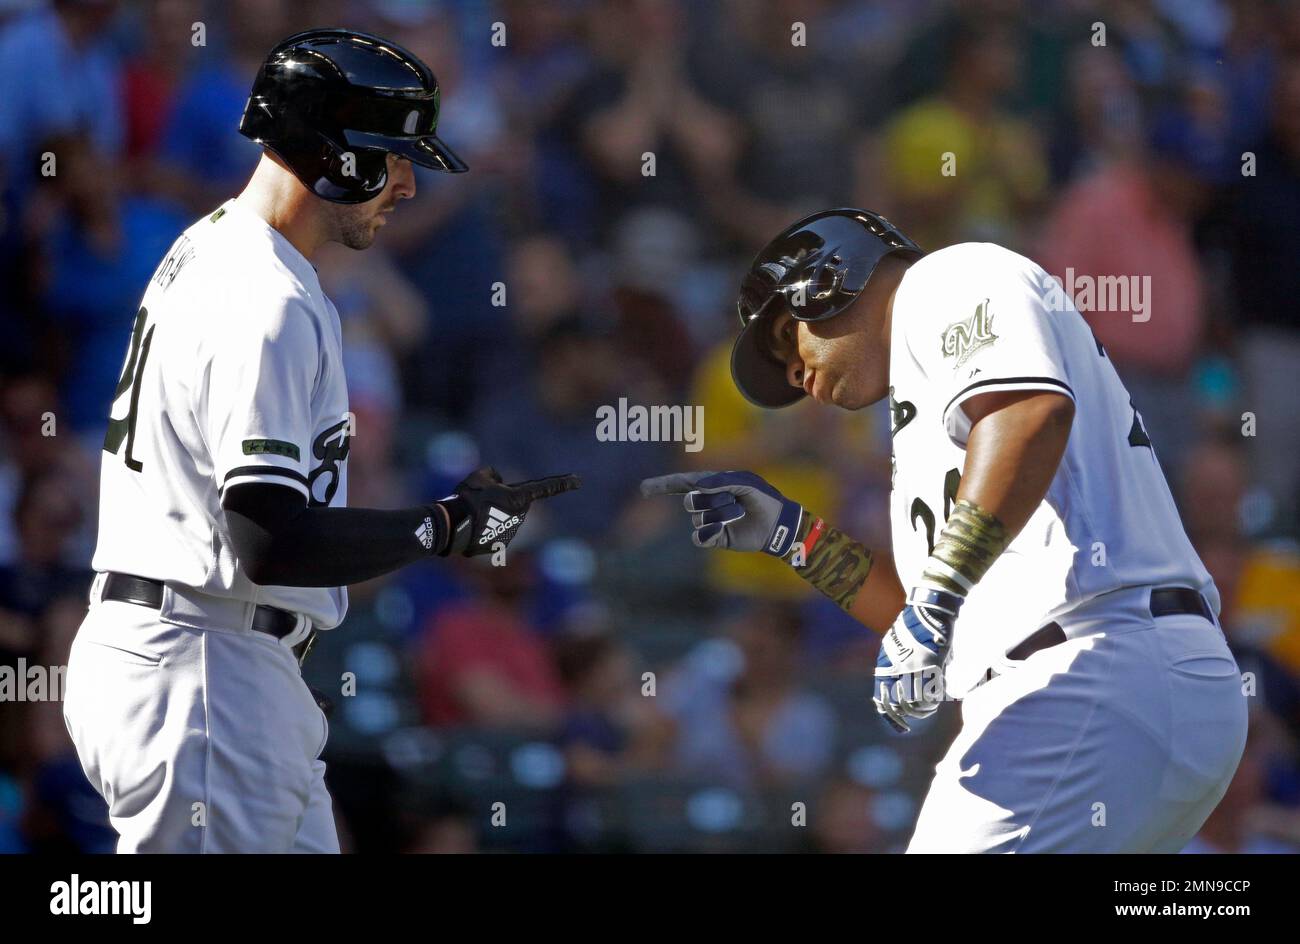 Milwaukee Brewers' Jesús Aguilar, right, gestures after hitting a double  during the seventh inning of a baseball game against the New York Mets,  Sunday, May 5, 2019, in Milwaukee. (AP Photo/Aaron Gash